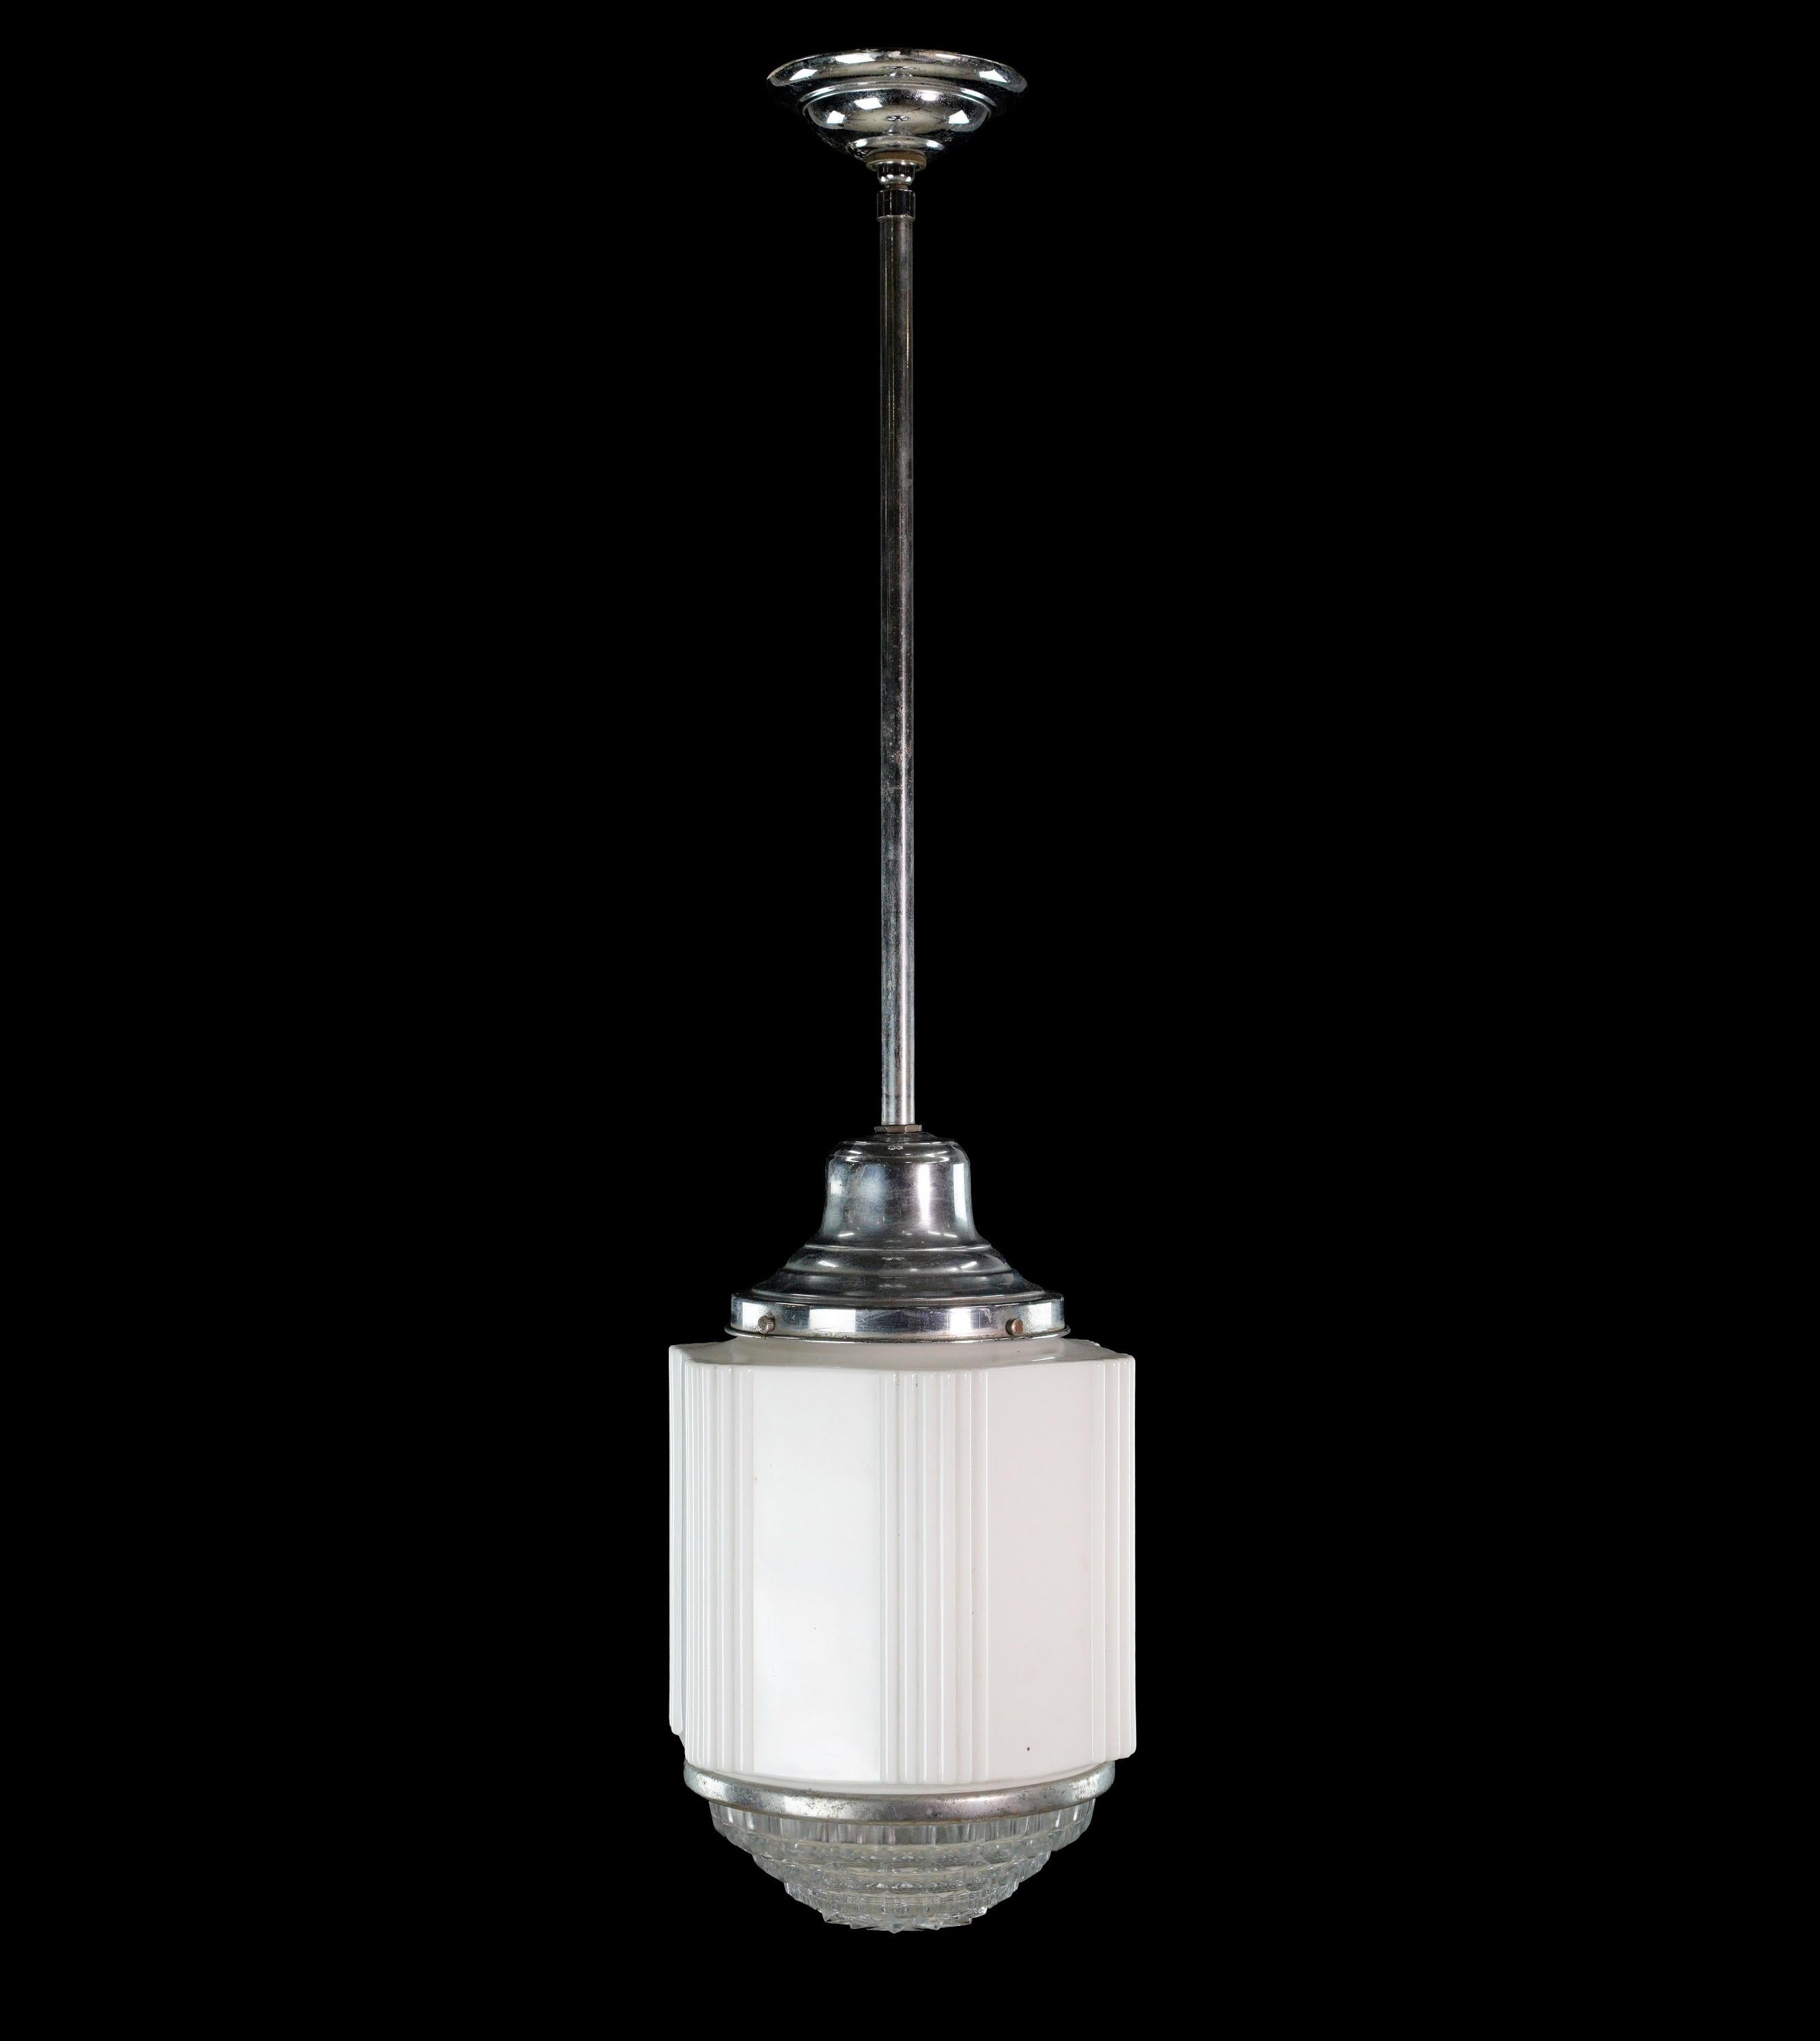 This Art Deco style skyscraper pendant light is attached to a nickel plated steel tube and canopy, with a fluted milk glass shade and clear bottom lens housing one standard socket. The Fresnel lens is held together by an adjustable silver ring.